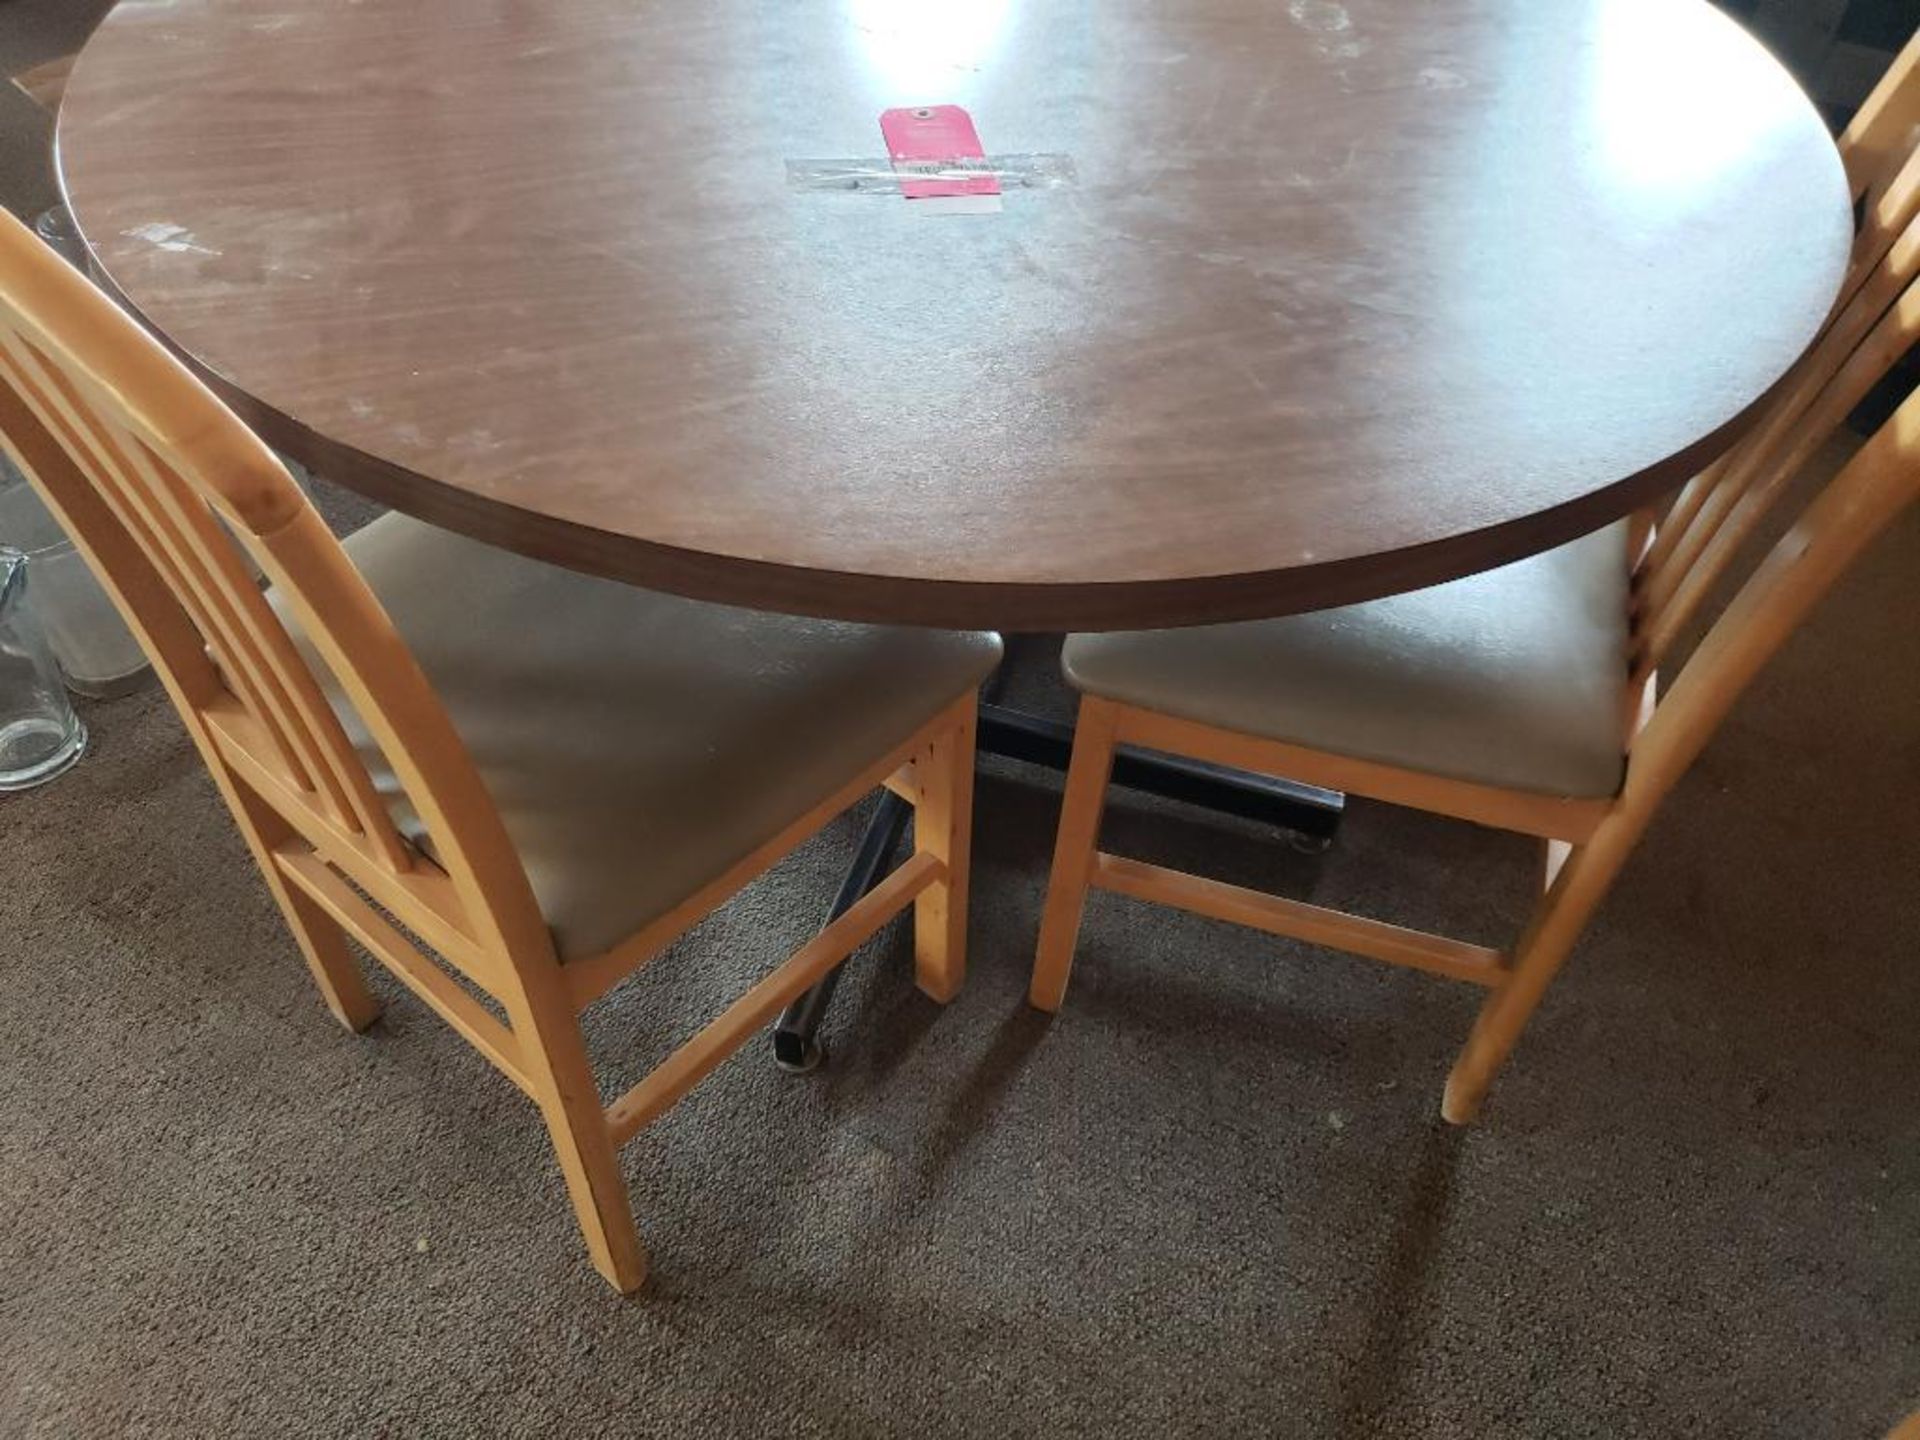 Table with 4 chairs. Table size 47in round. - Image 2 of 3